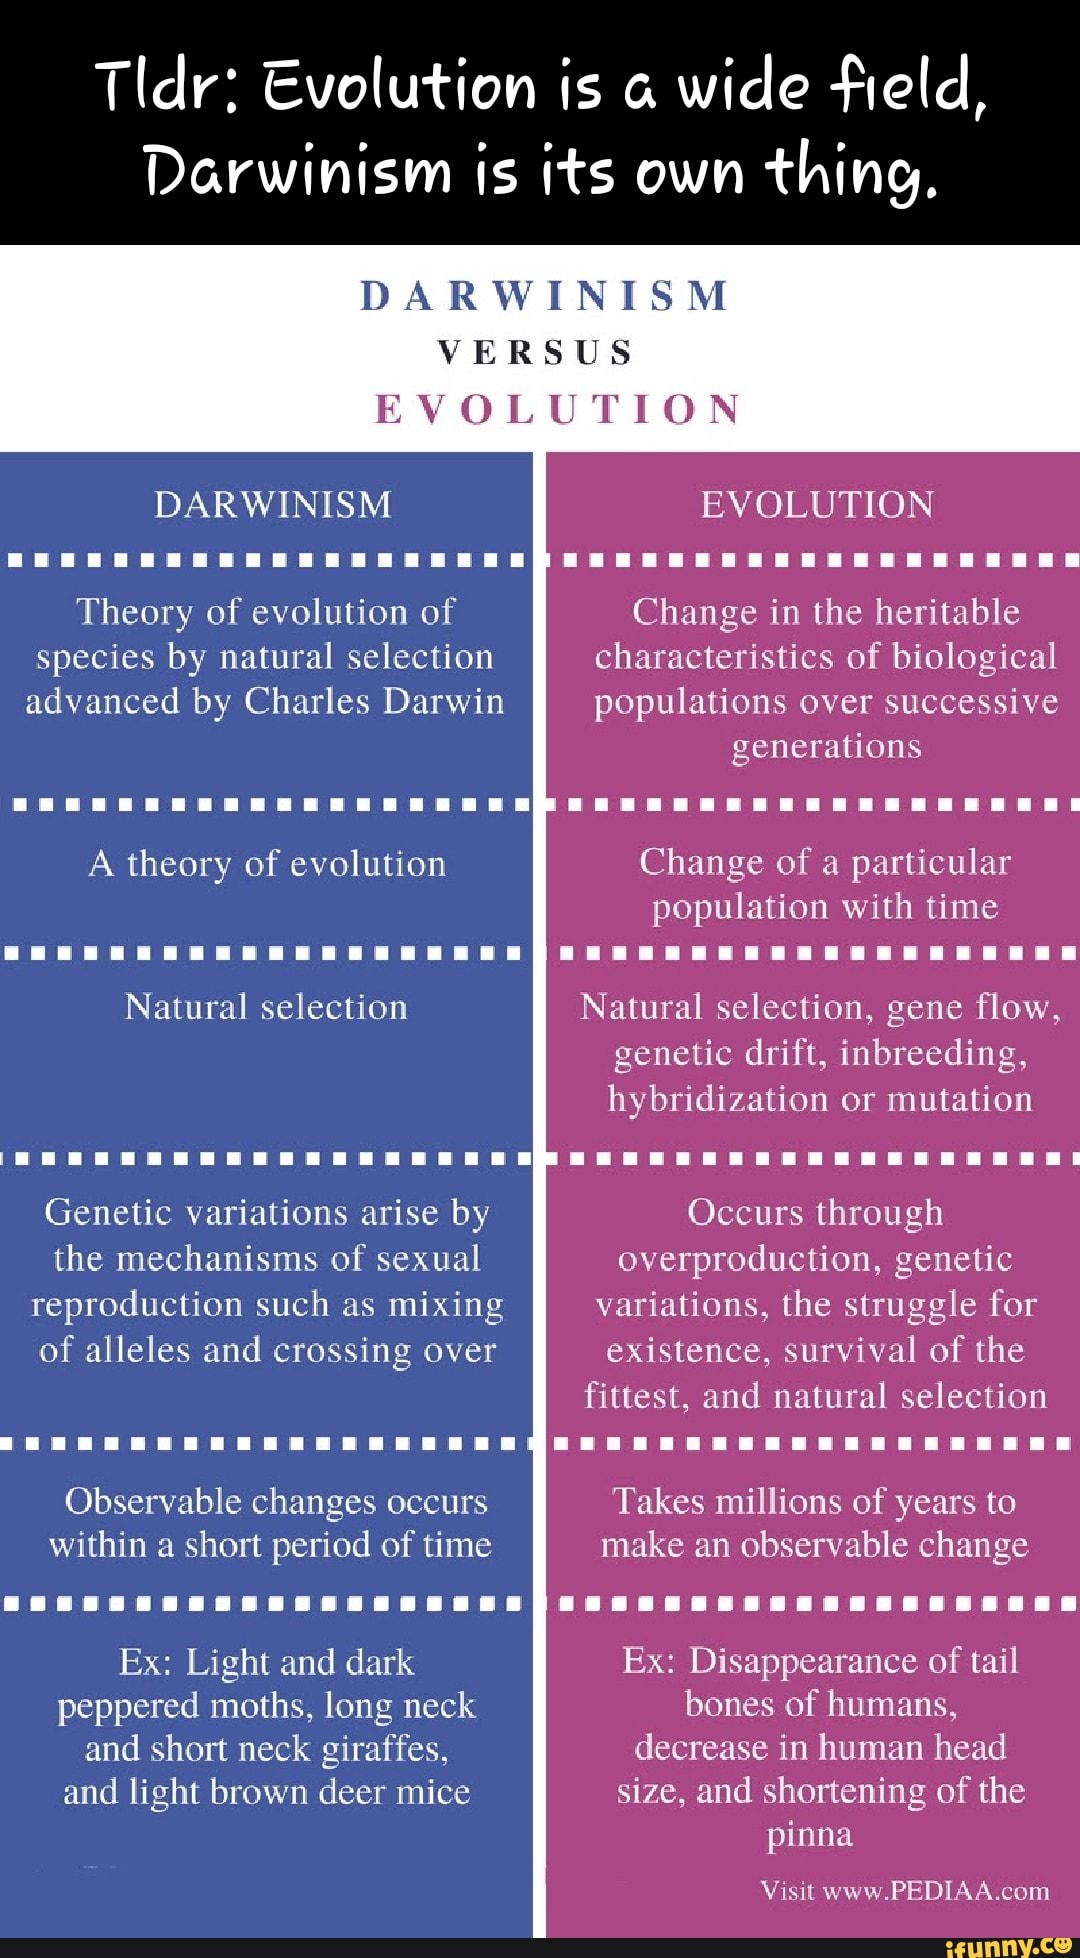 reductor auktion grå Tldr: Evolution is a wide field, Darwinism is its own thing, DARWINISM  VERSUS EVOLUTION DARWINISM EVOLUTION